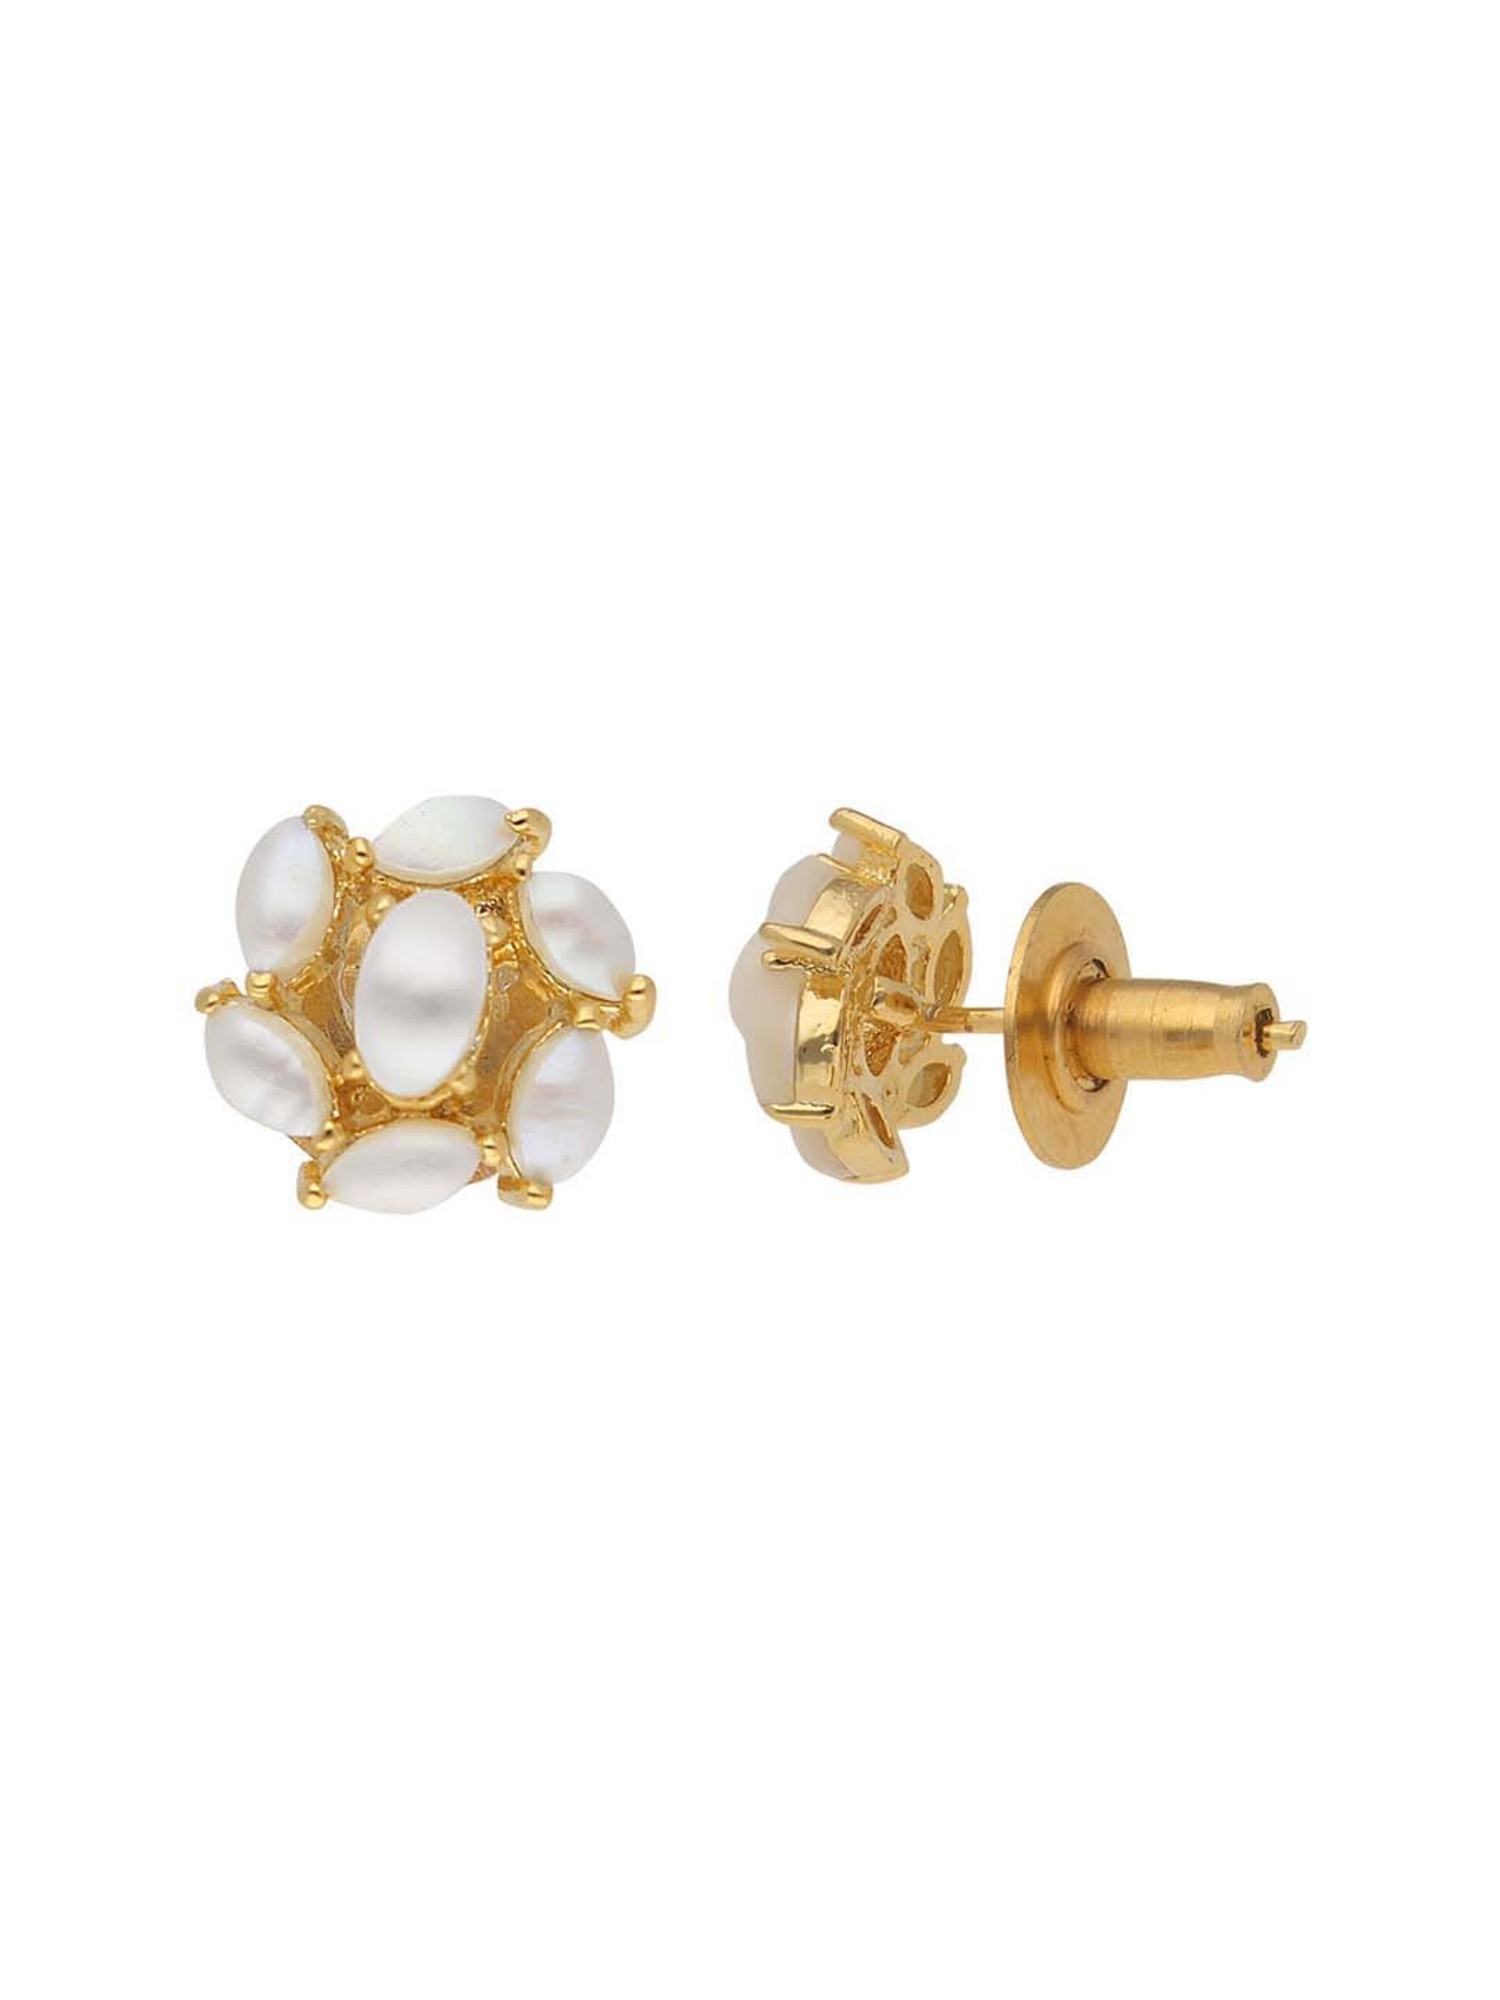 Buy Tiny Freshwater Pearl Earring Studs 9ct Gold Pearl Earrings Online in  India  Etsy